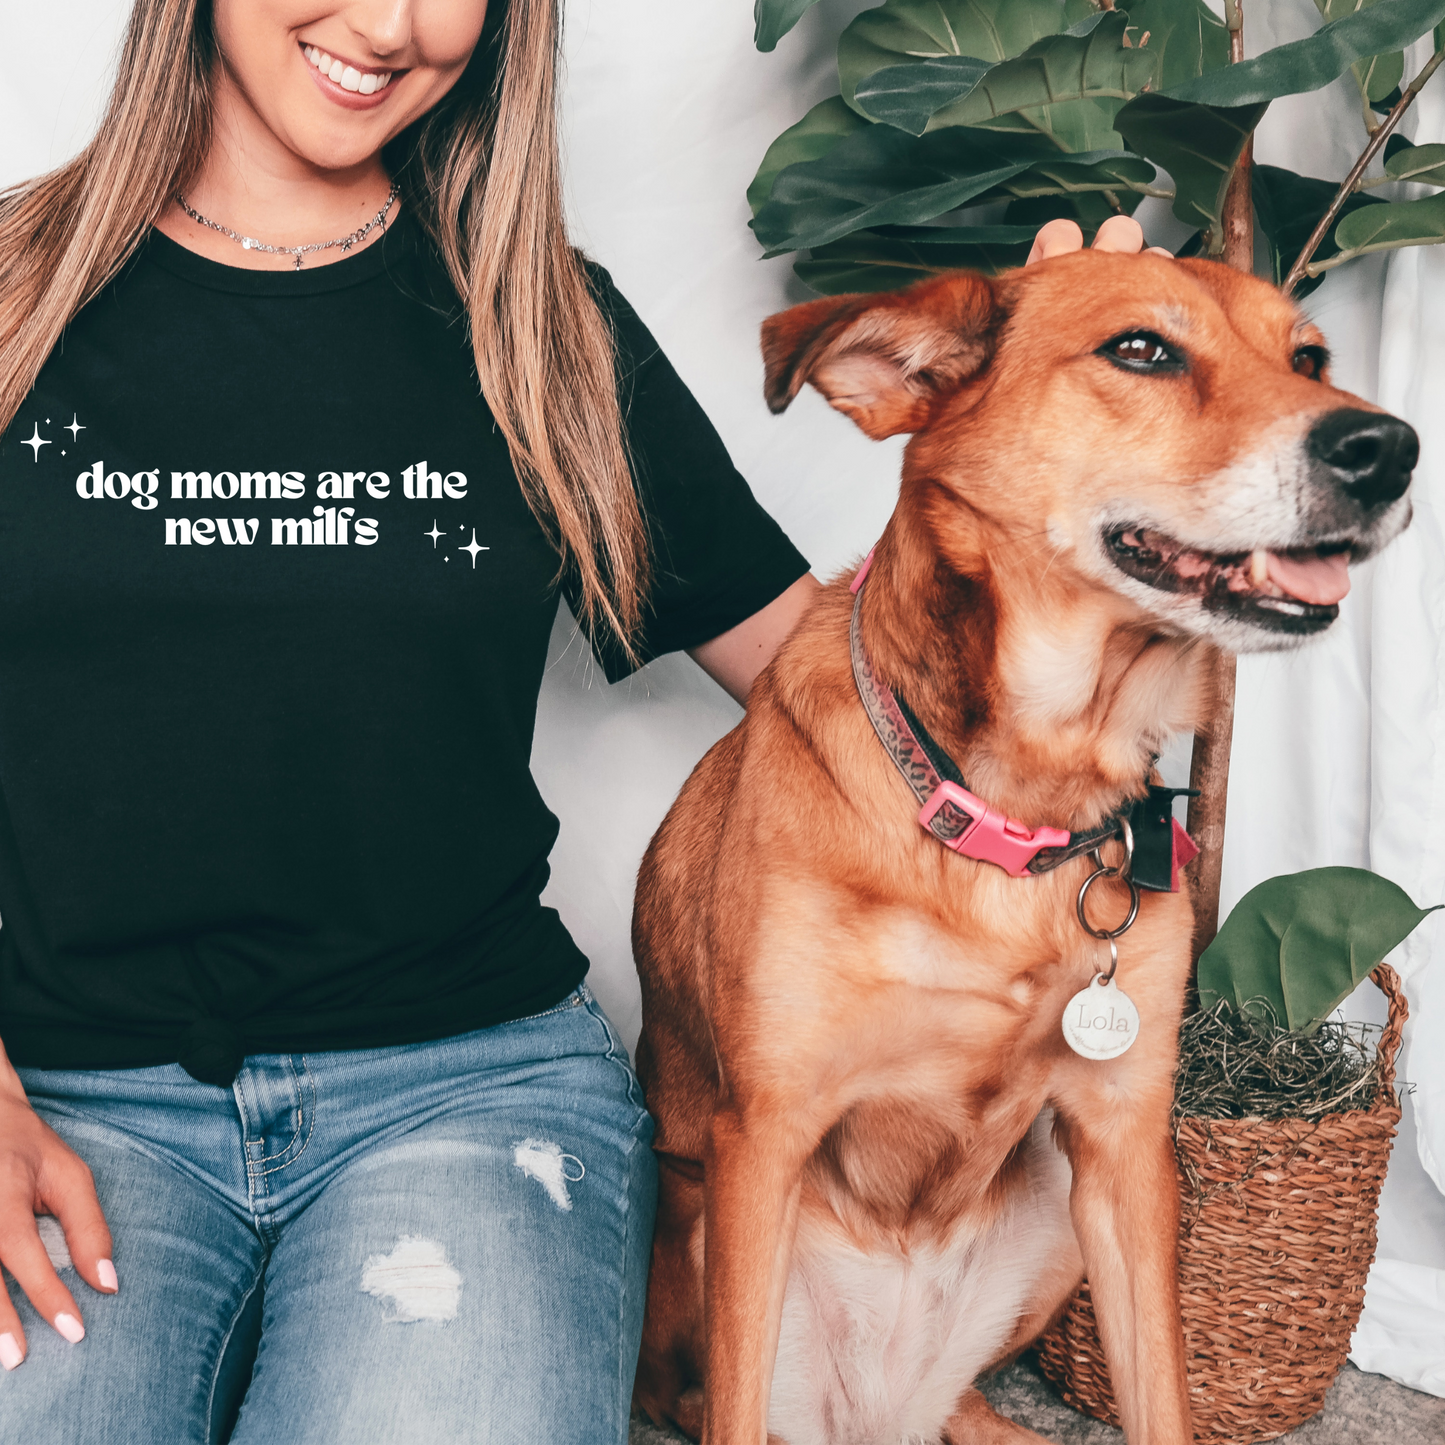 Dog Moms Are the New Milfs